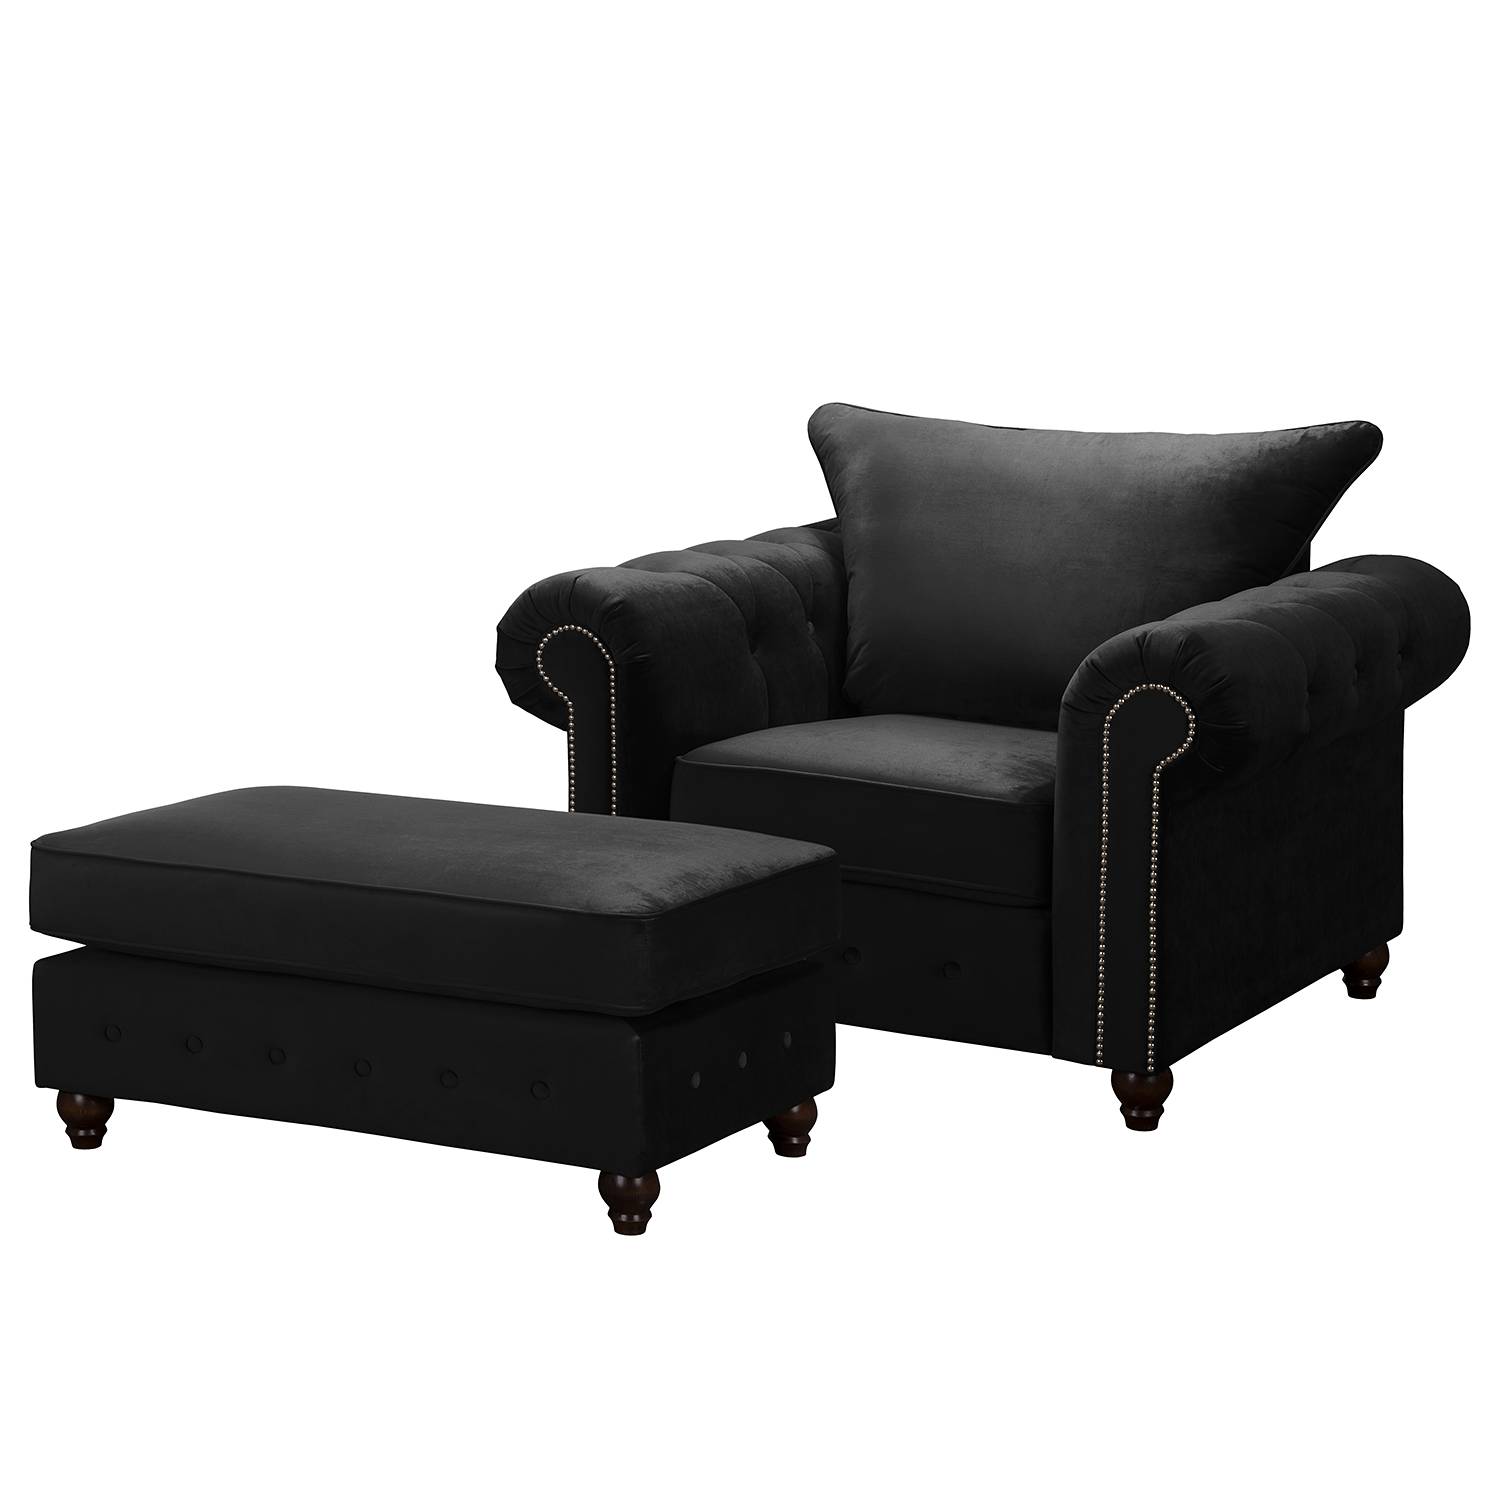 Image of Fauteuil Solita 000000001000135727